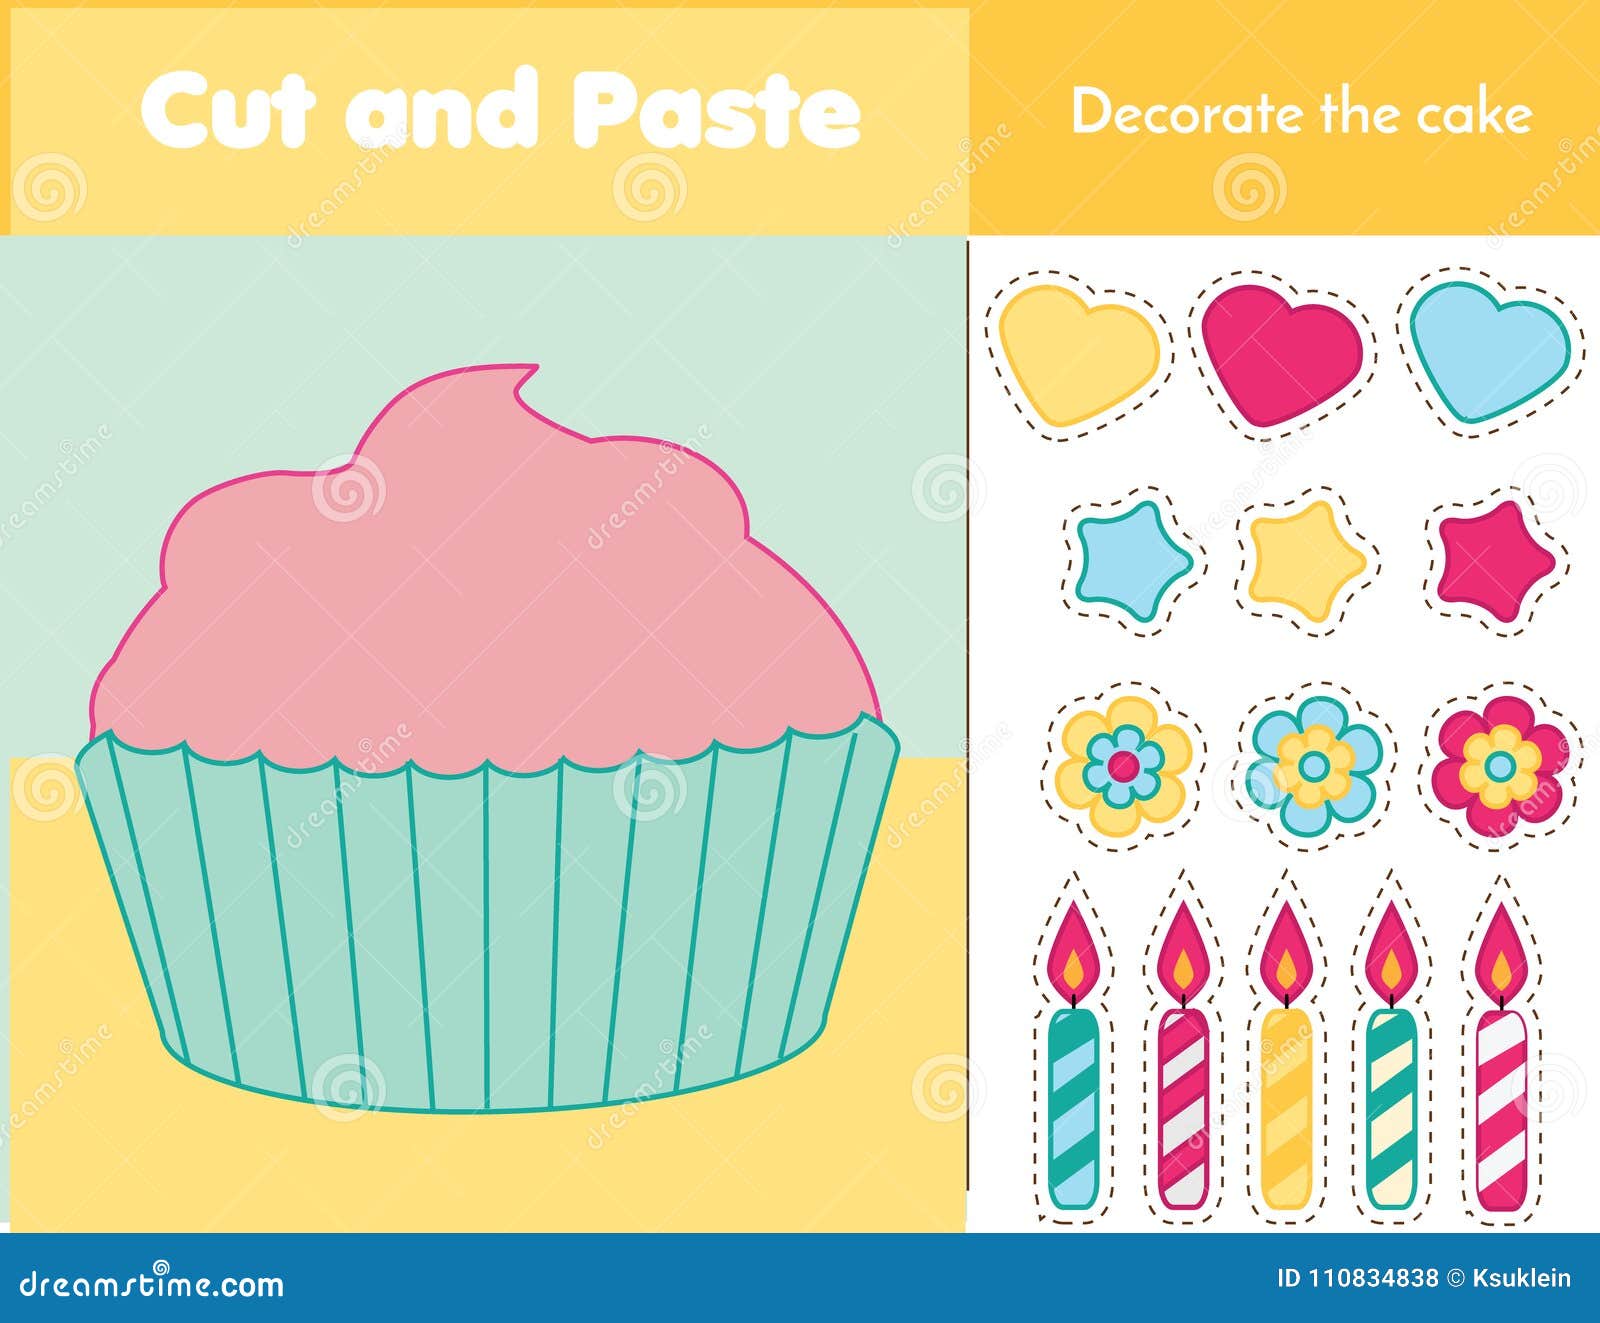 cut and paste children educational game. paper cutting activity. decorate a cupcake with glue and scissors. stickers game for todd